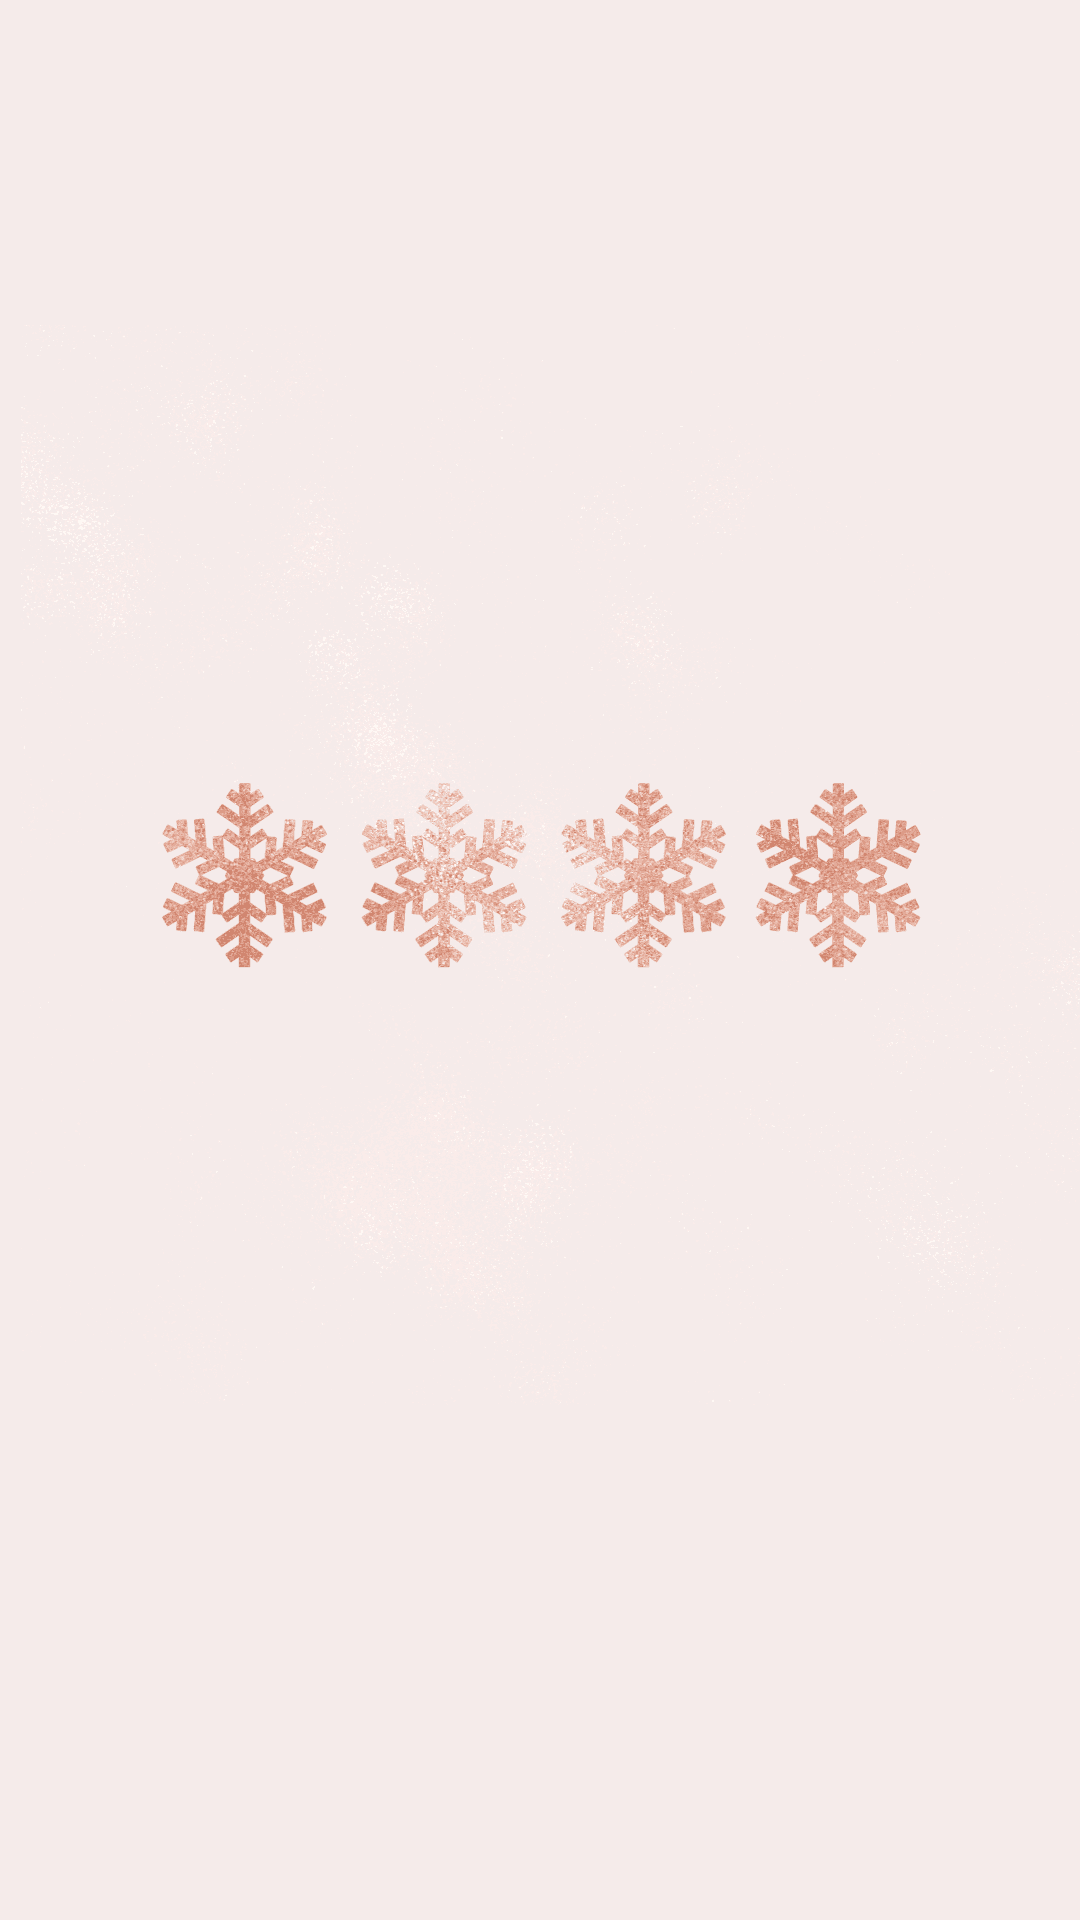 A Pink Background With Snowflakes On It